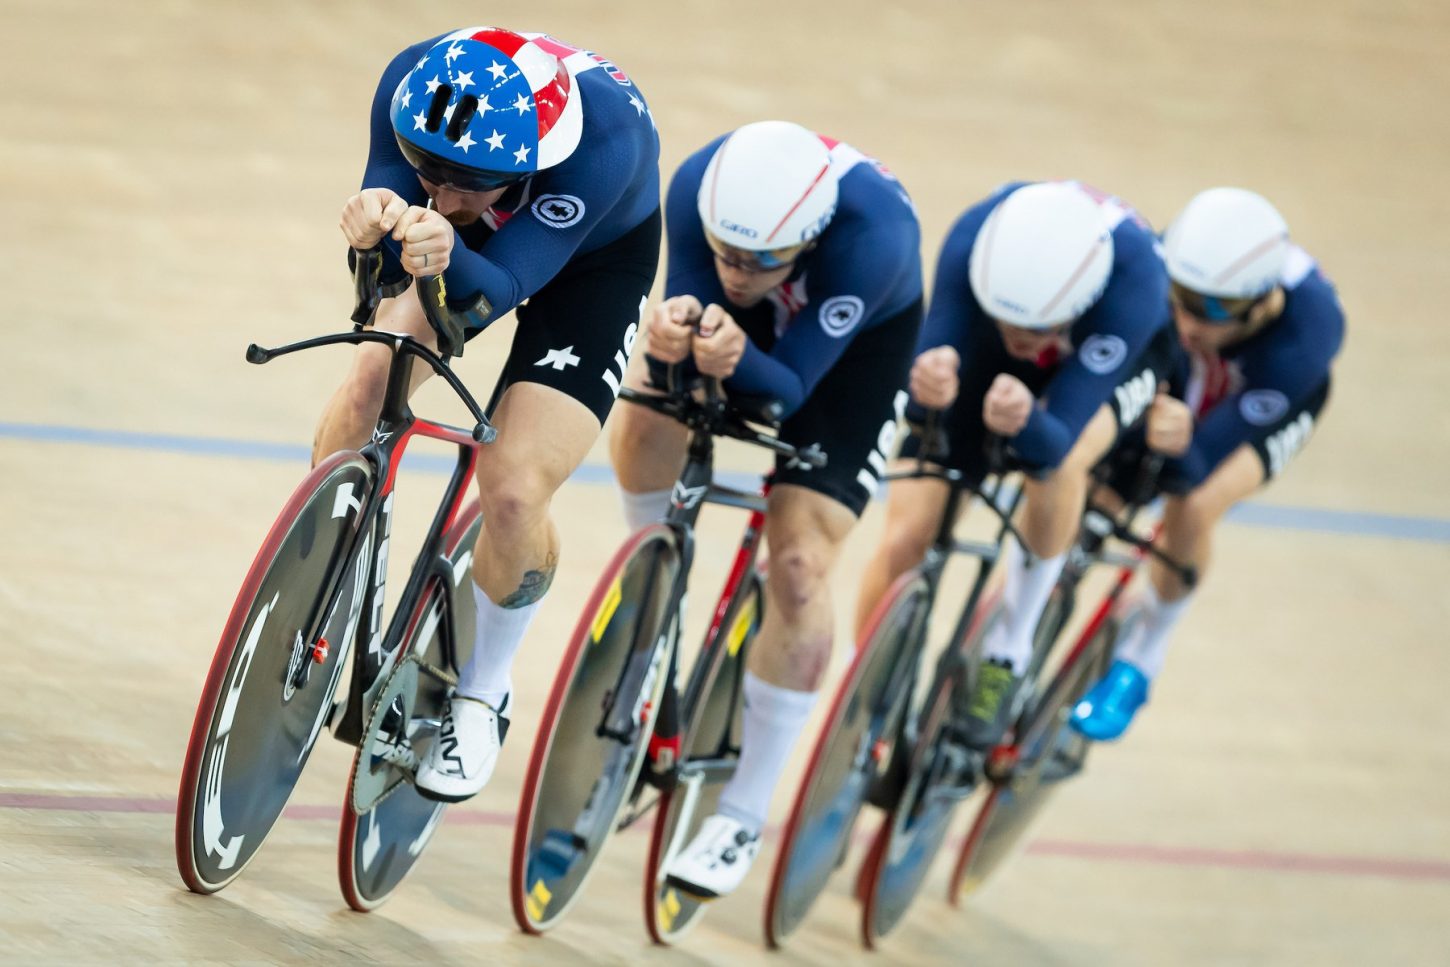 UCI Track Cycling World Cup 2019 Update